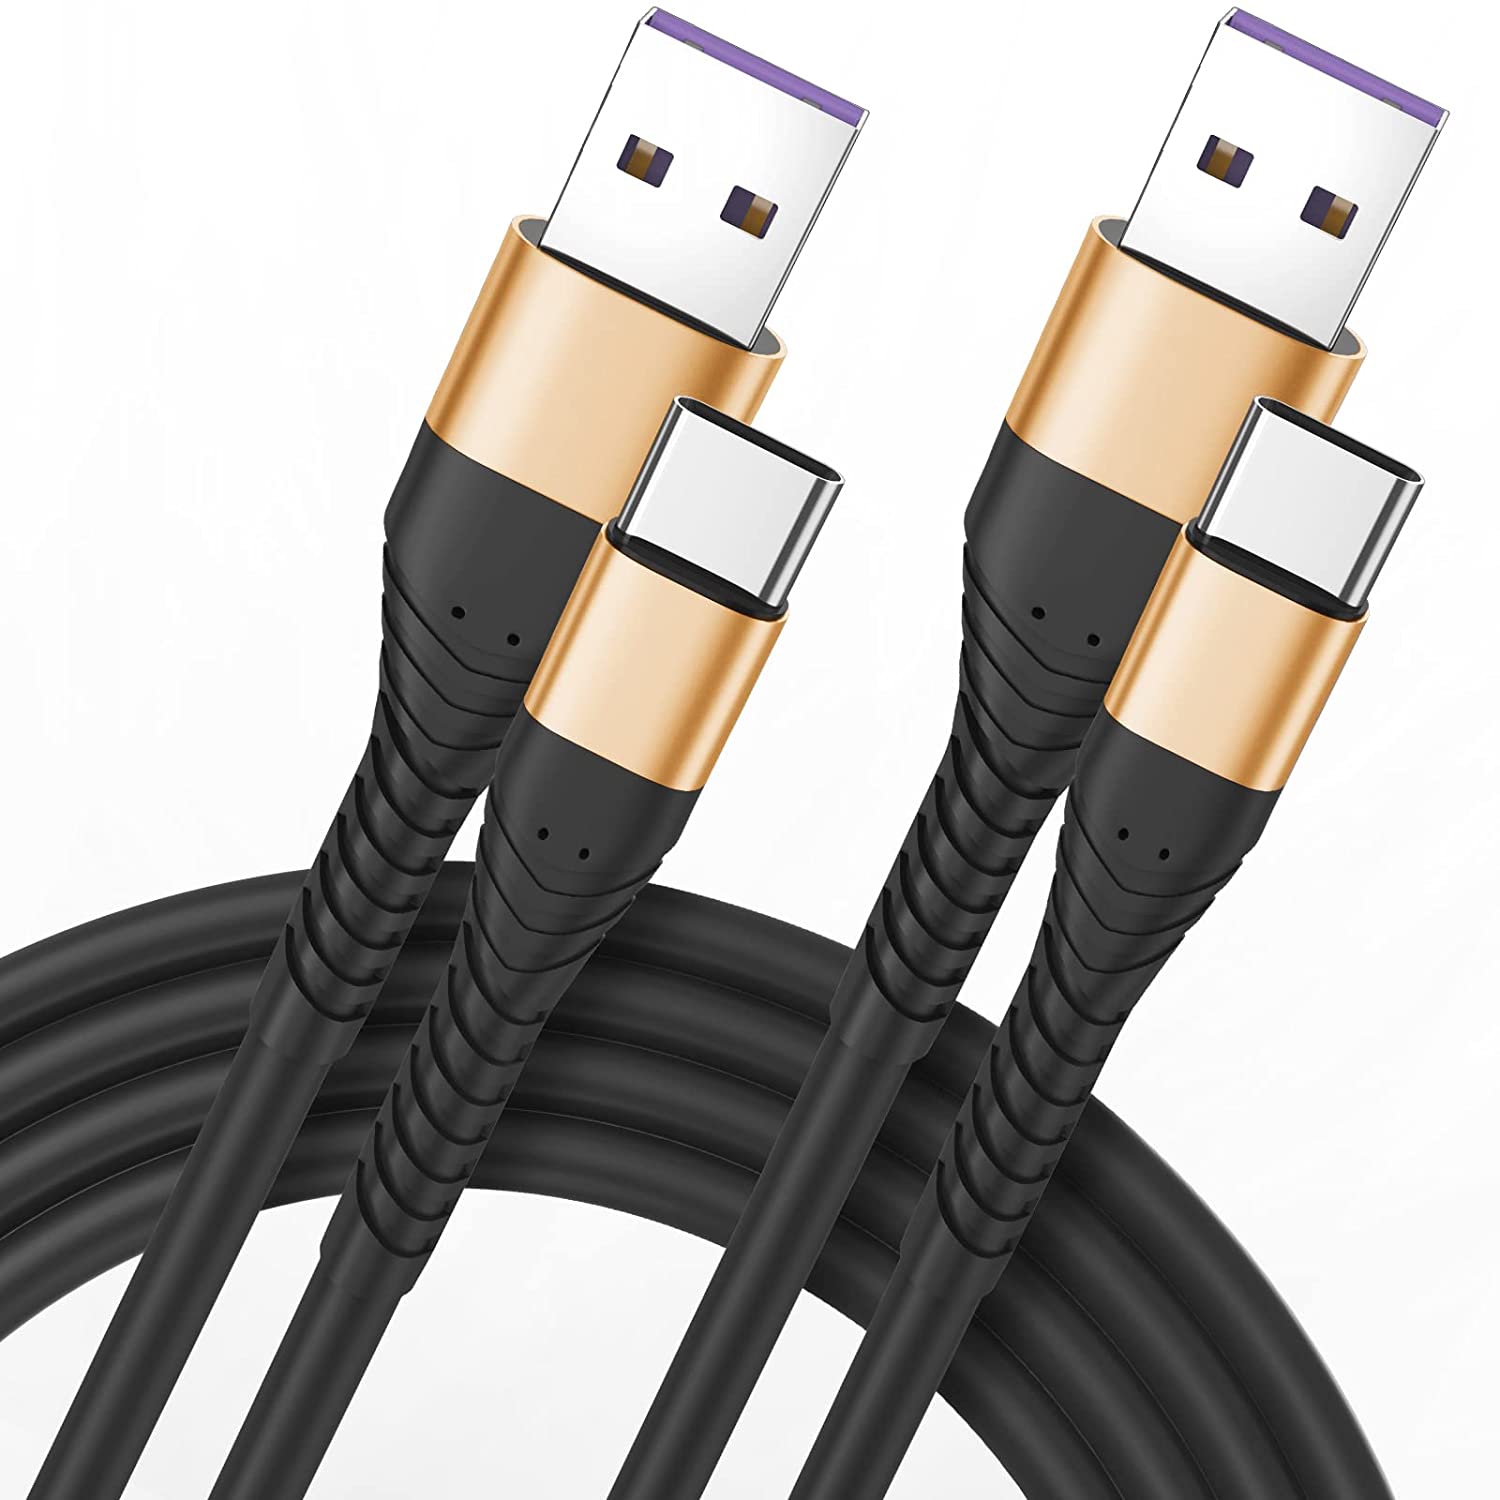 I USB Type C Cable 10ft,Extra Long 2Pack 10Foot USB C Cable USB A 2.0 to USB-C Fast Charger Compatible Samsung Galaxy S10 S9 S8 Plus Note 9 8,Moto Z,LG V30 V20